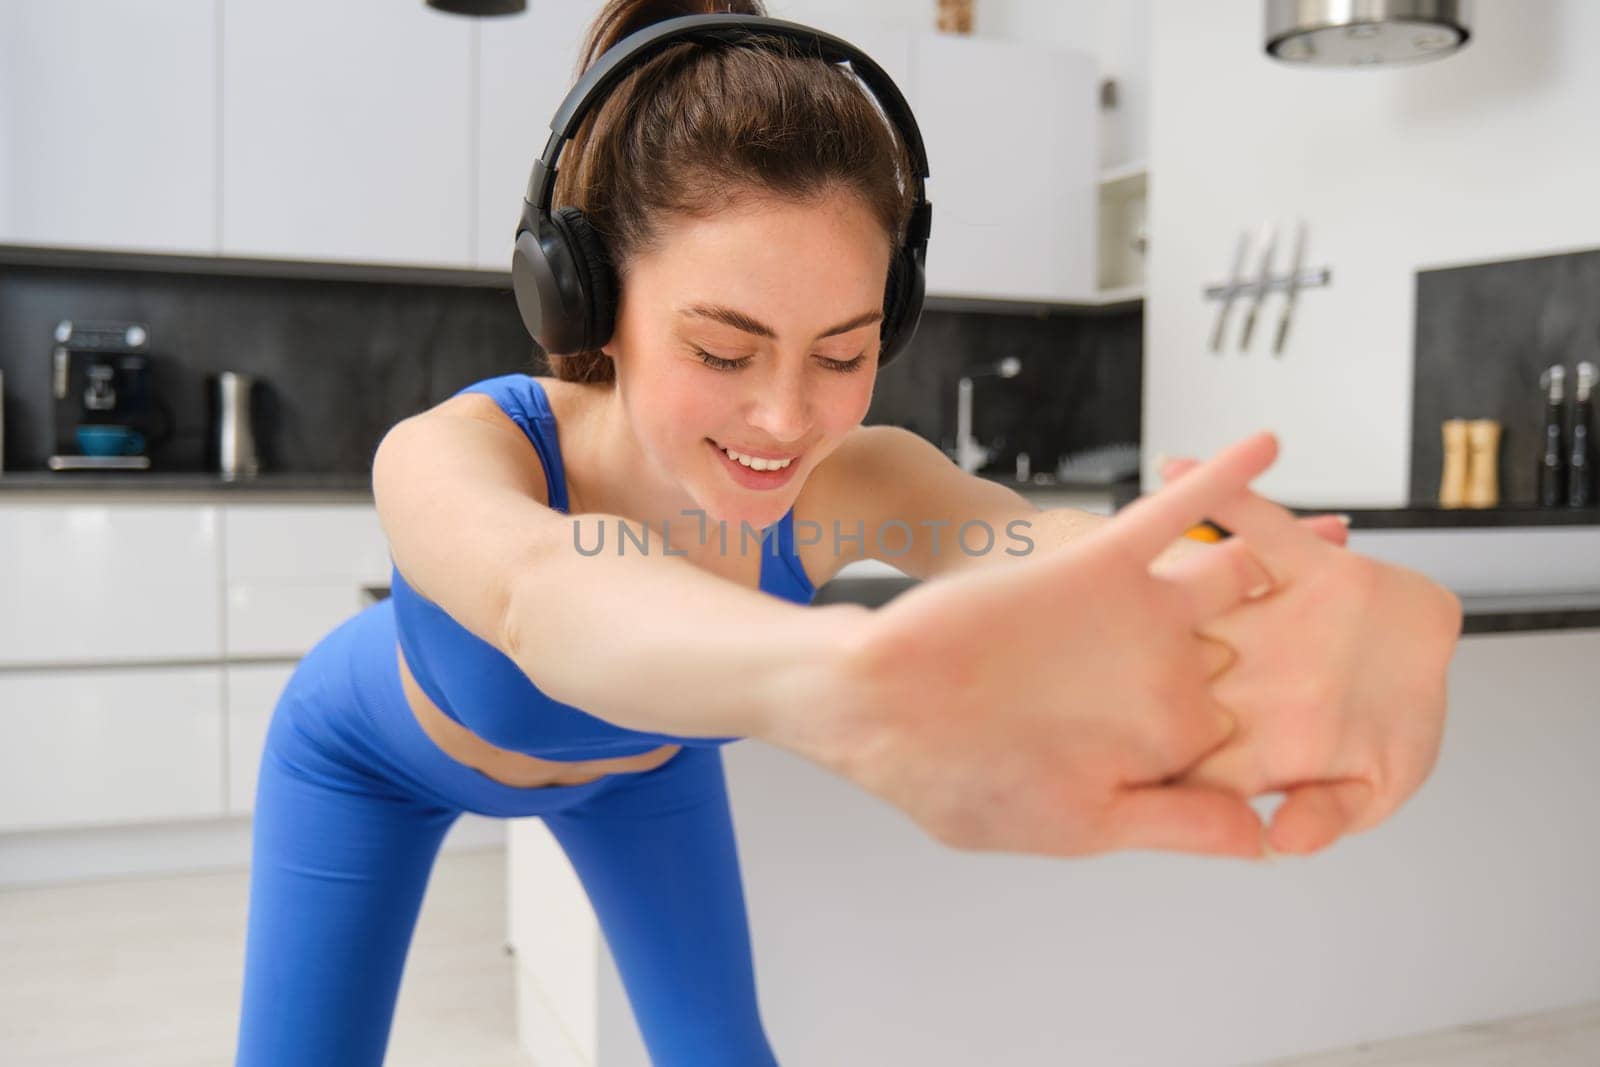 Close up portrait of fit and healthy woman, smiling while doing workout exercises, listening music in wireless headphones, stretching arms, aerobics training at home, wearing blue activewear.